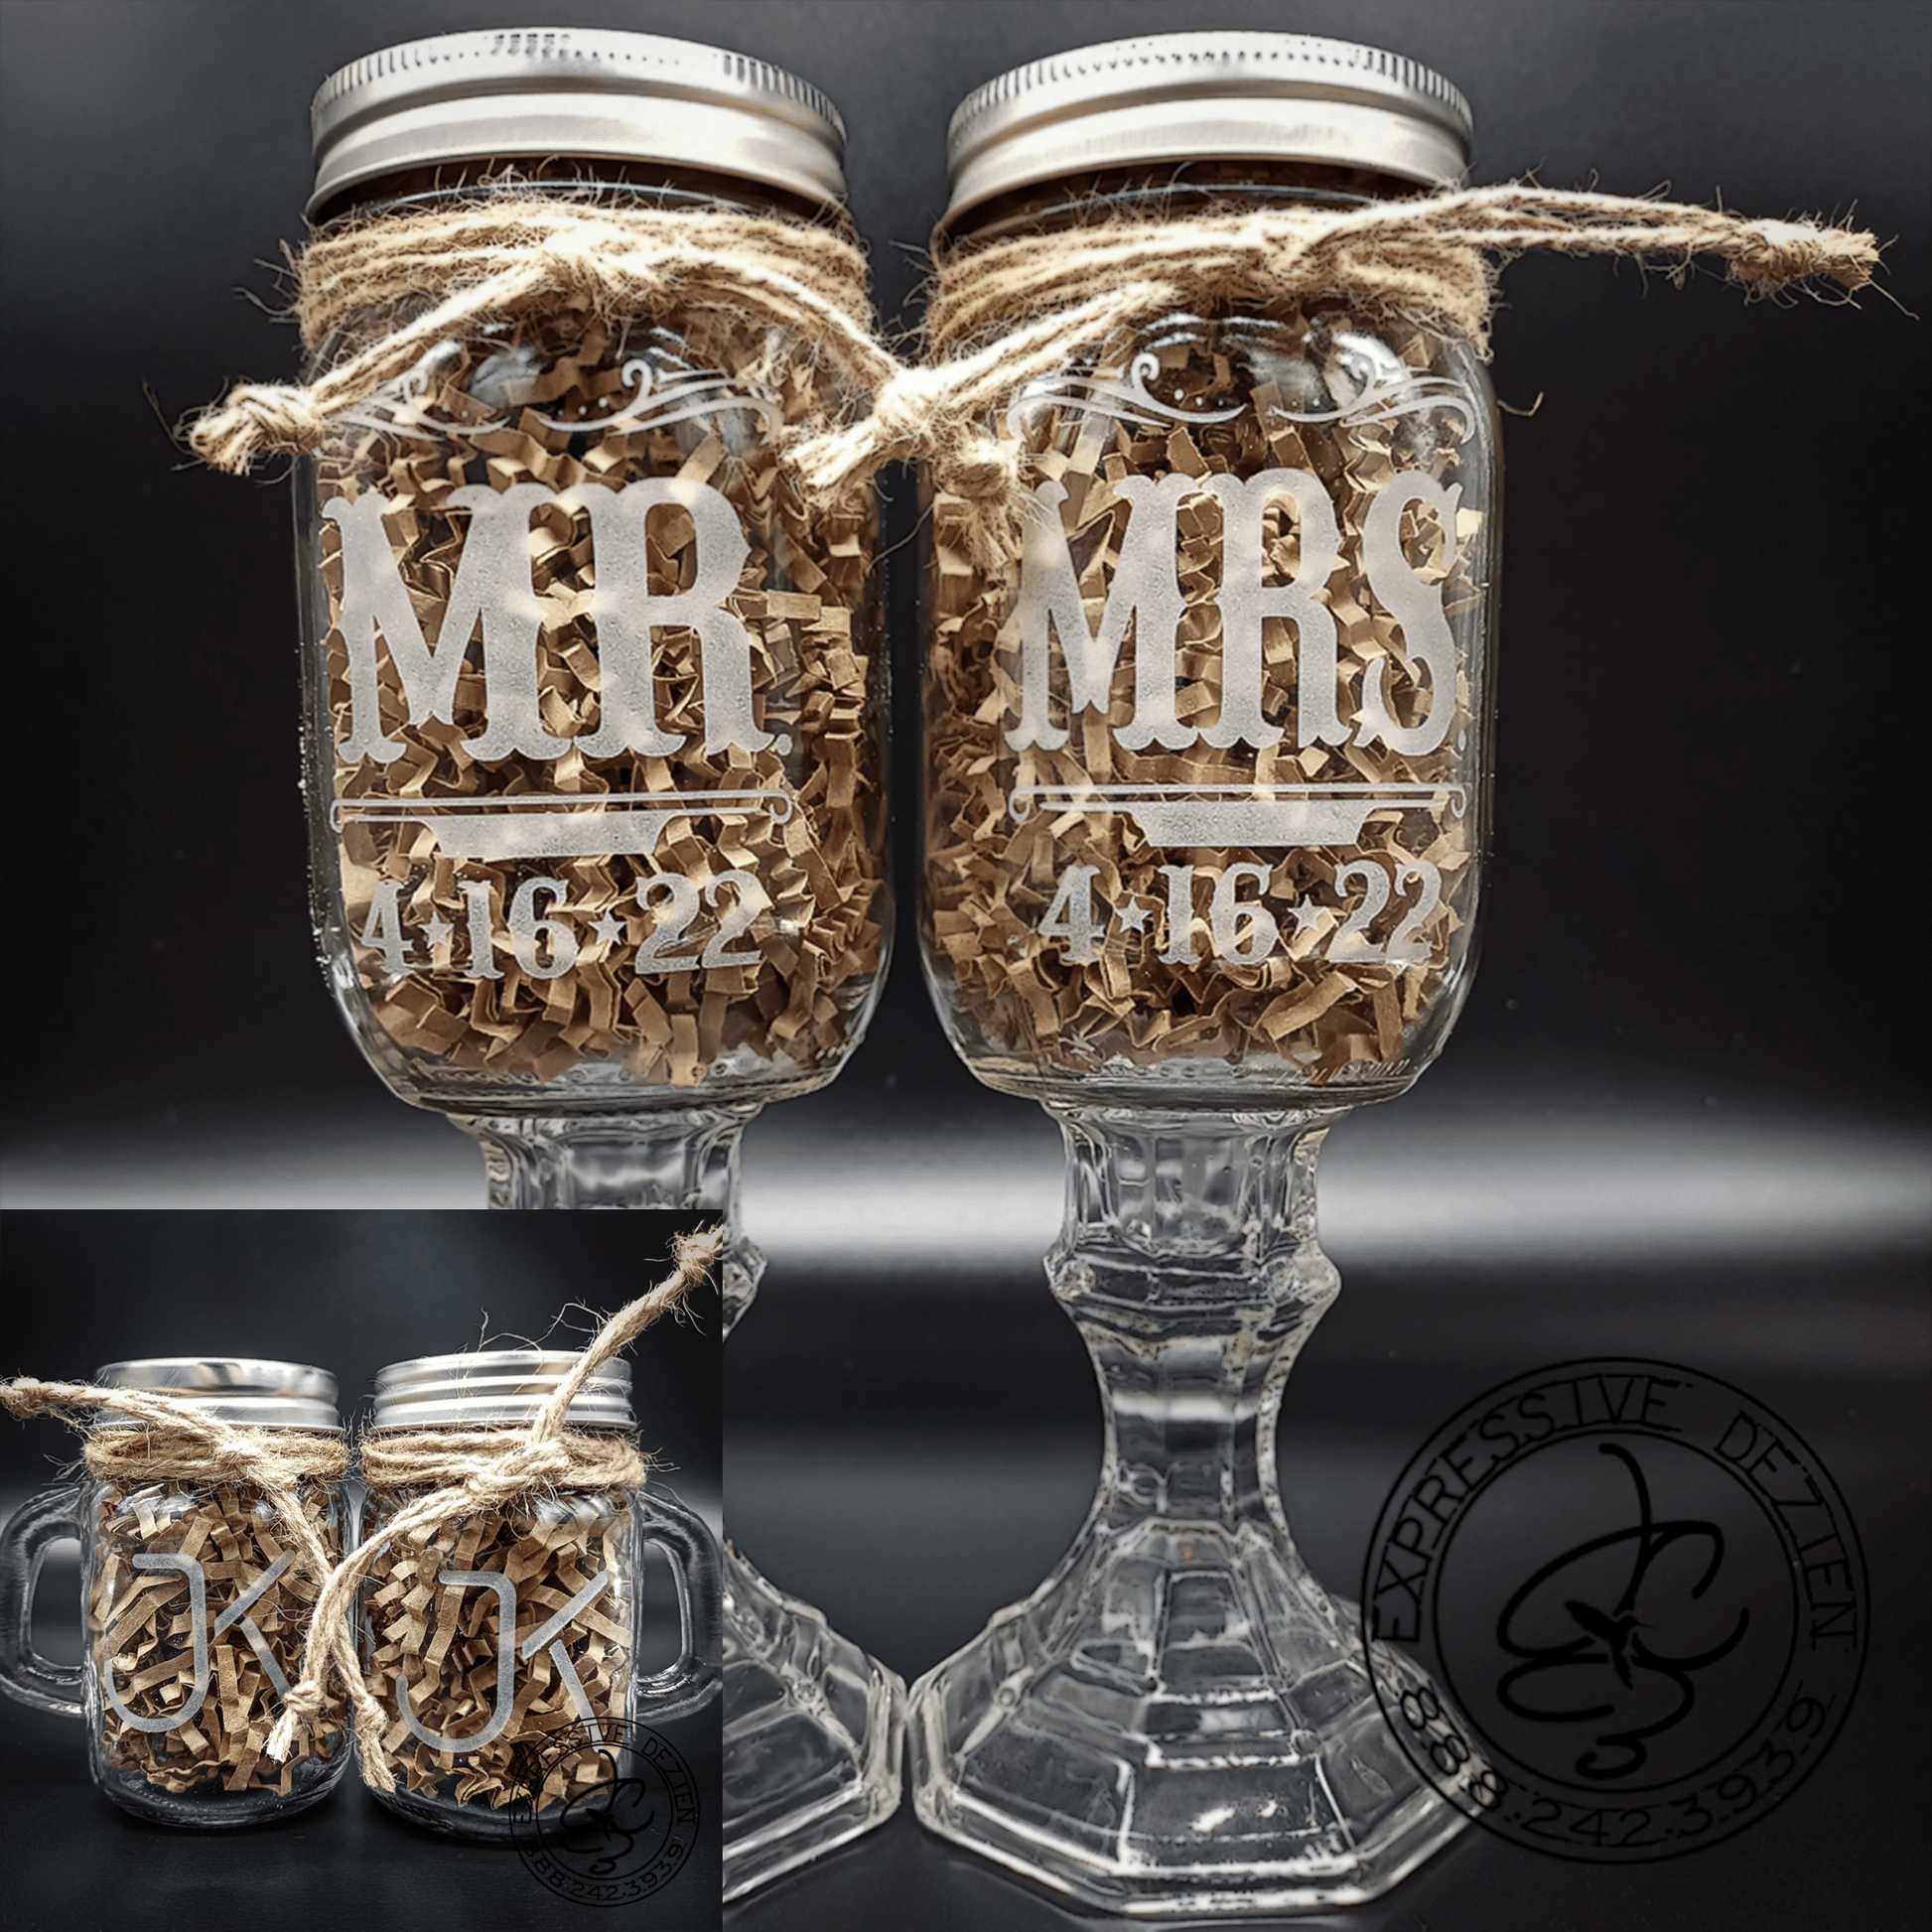 Rustic Rancher Wedding Set - Engraved Mason Jar Toasting and Wedding party Glasses with Salt & Pepper Shakers - Expressive DeZien 